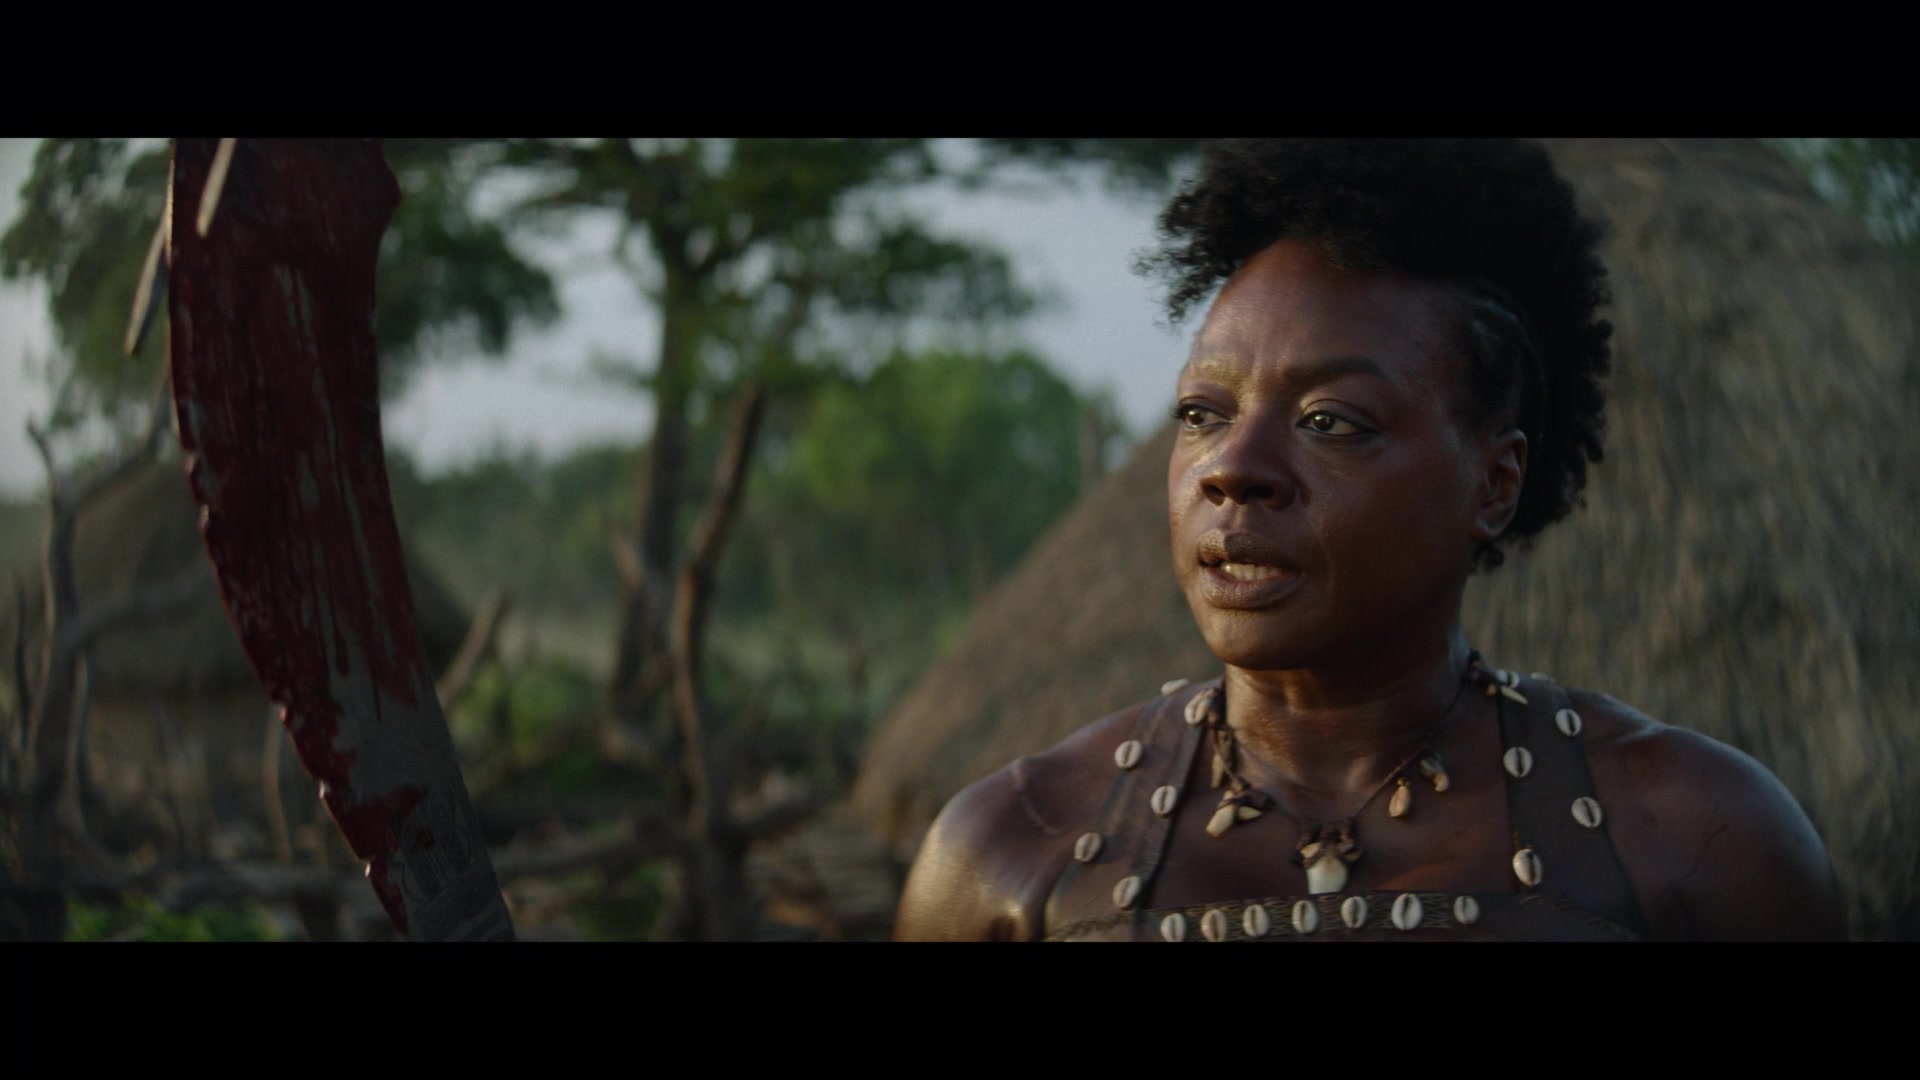 General Nanisca (Viola Davis) bloodies her blade in The Woman King (2022), Sony Pictures